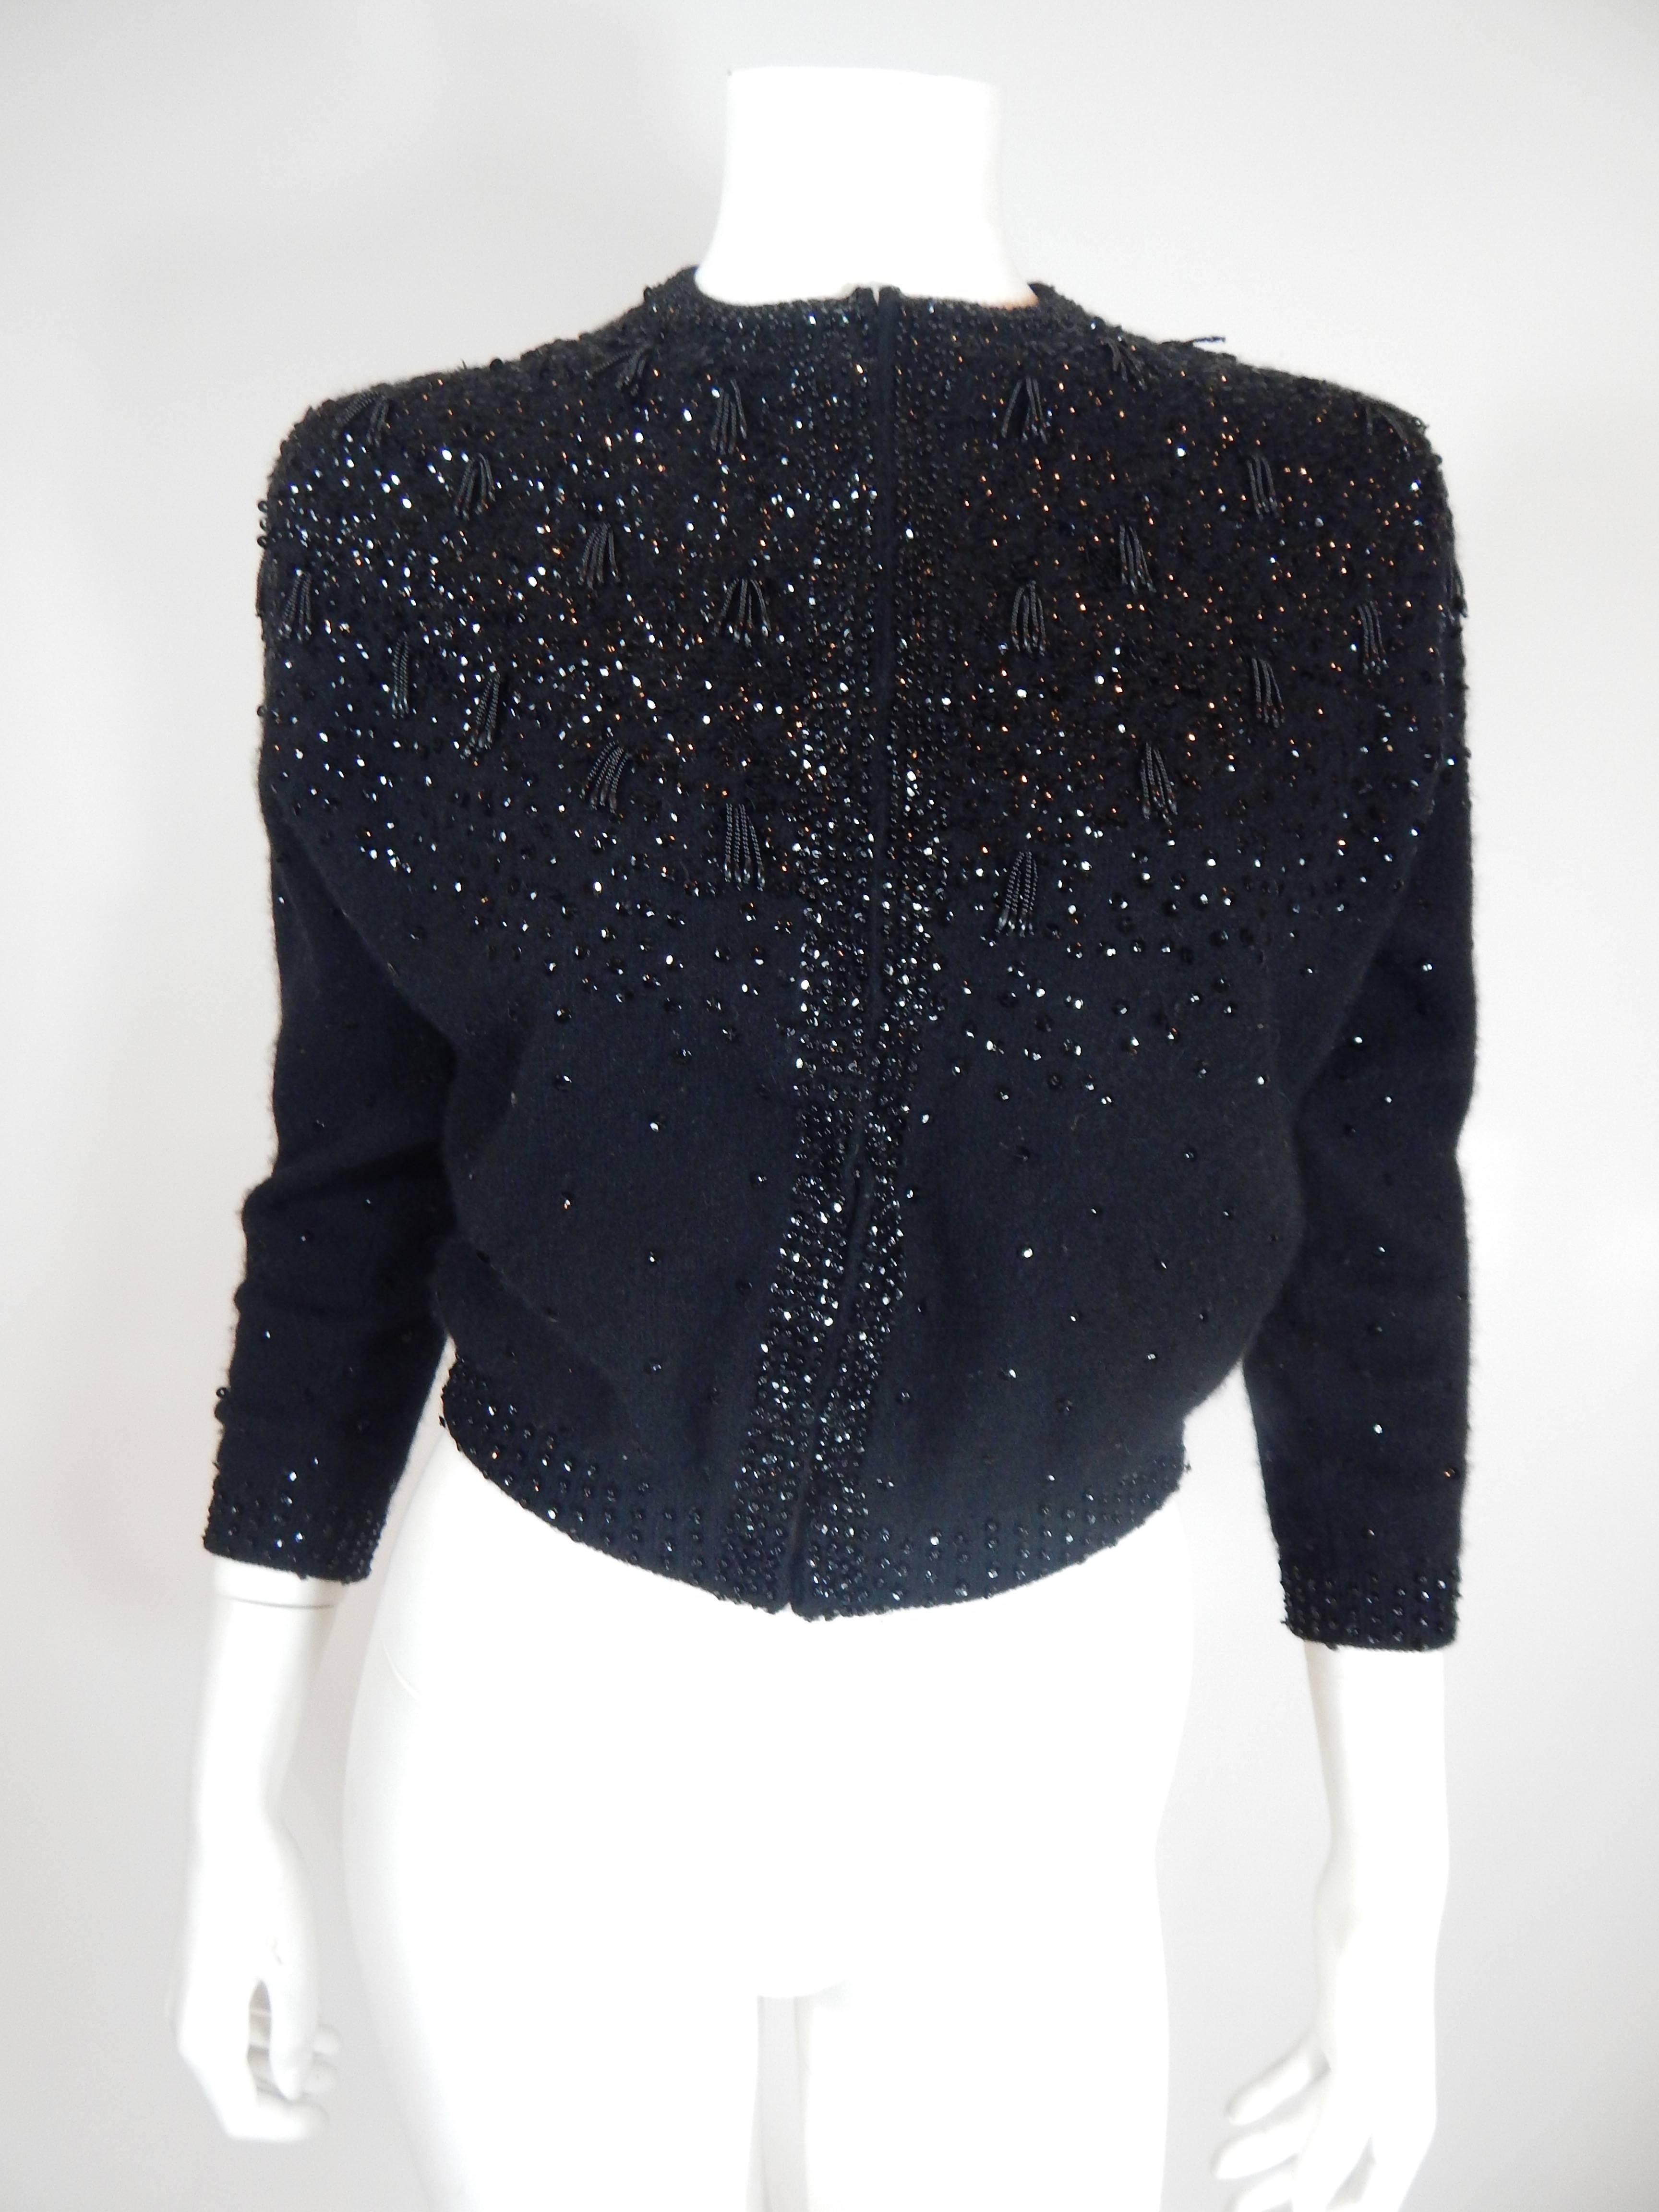 1950s Beaded Sequin Cardigan Sweater. Hand decorated and Made in Japan. Black sweater, beads, fringe beads and sequin. Entire piece is black. Hook and eye front closures. 70% Lambswool, 20% Angora, 10% Nylon. Excellent Condition. Siz e Tag reads 38.